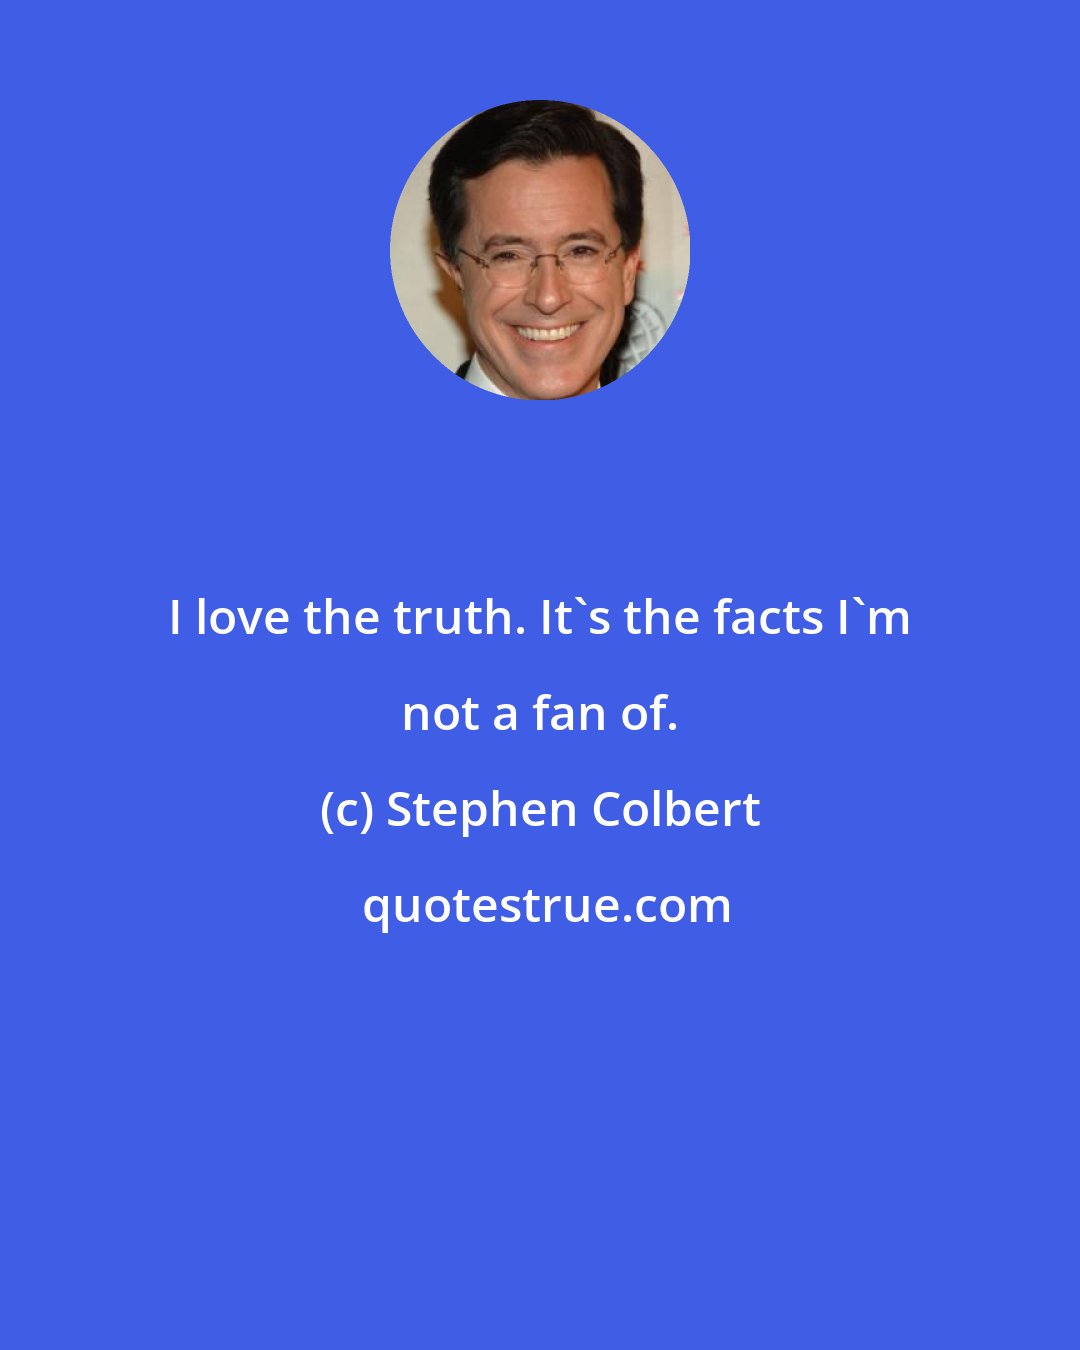 Stephen Colbert: I love the truth. It's the facts I'm not a fan of.